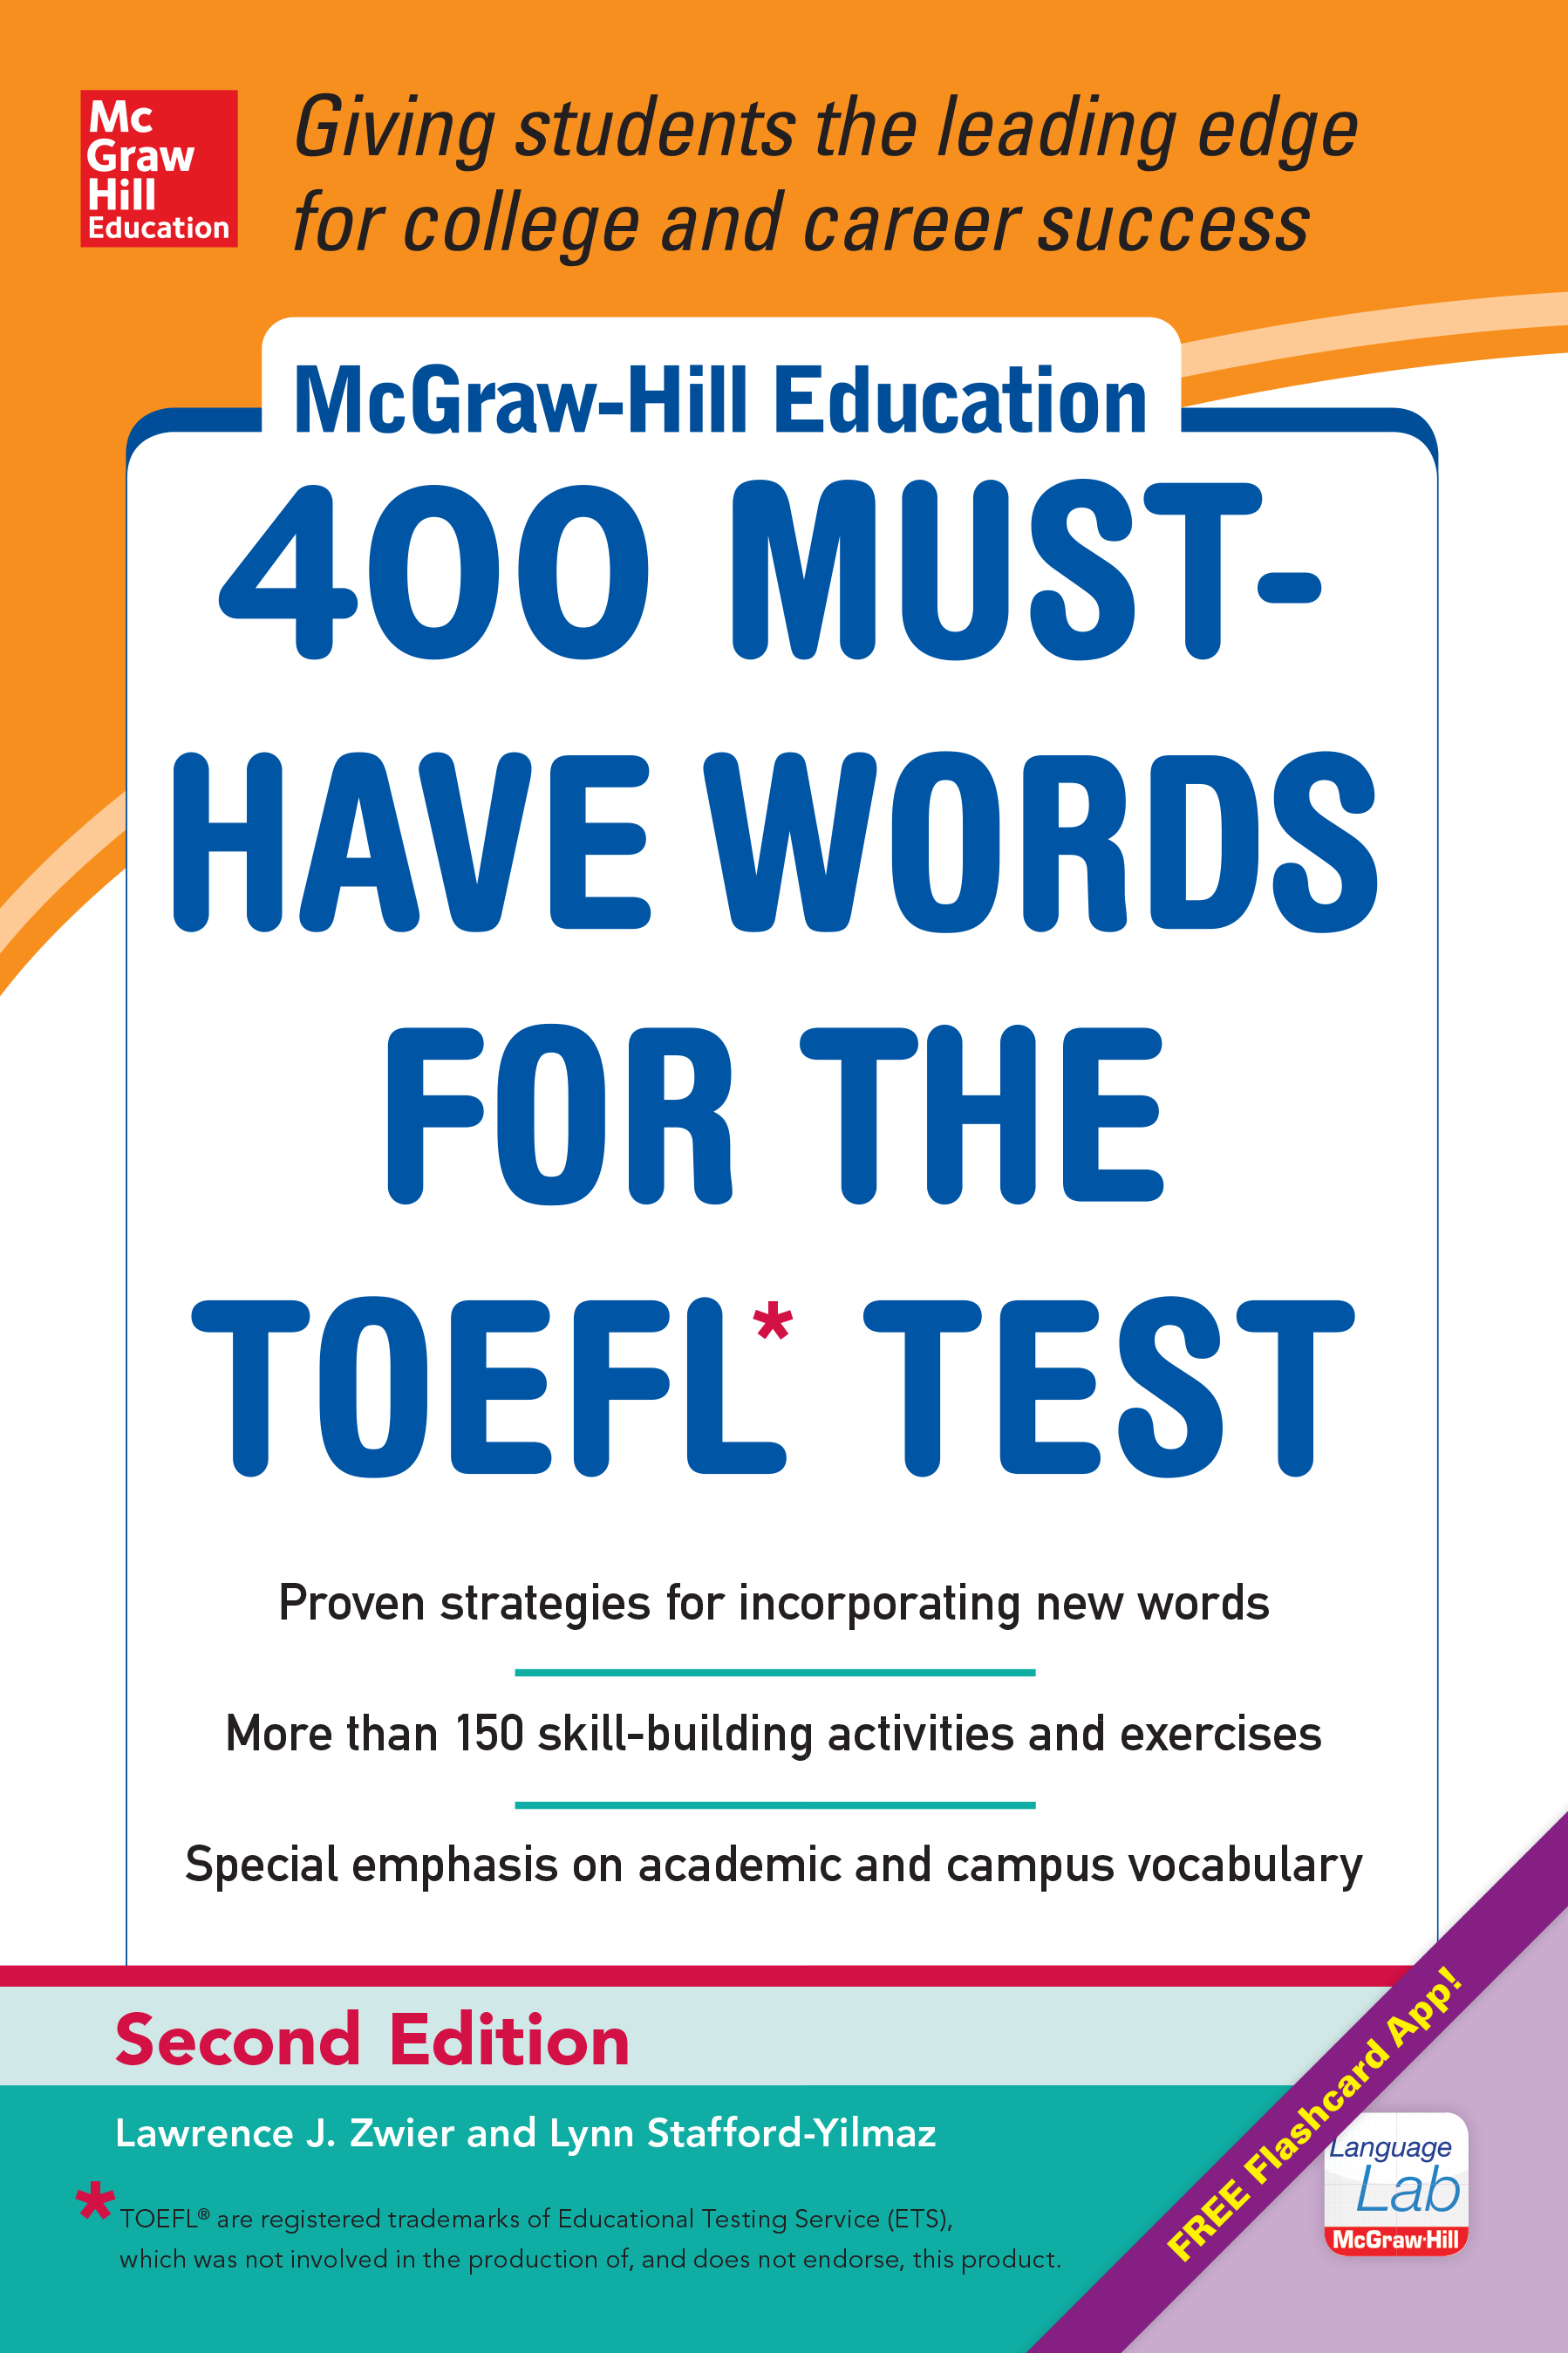 McGraw-Hill Education 400 Must-Have Words for the TOEFL, 2nd Edition